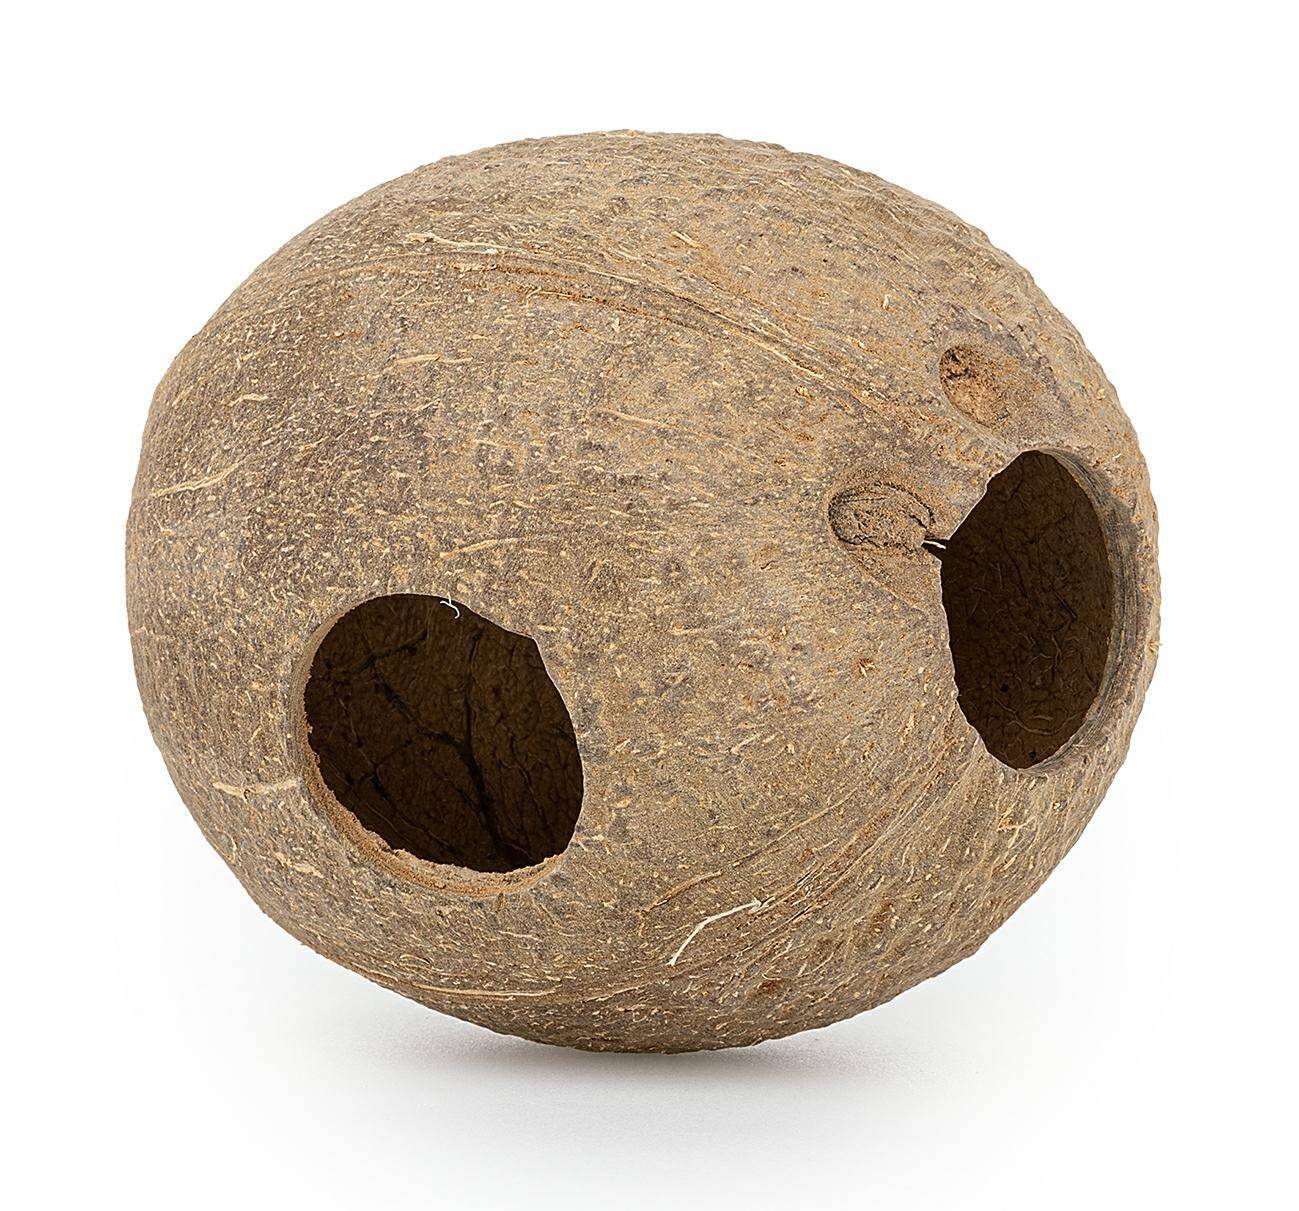 Coconut shell fulls brushed 3 pieces